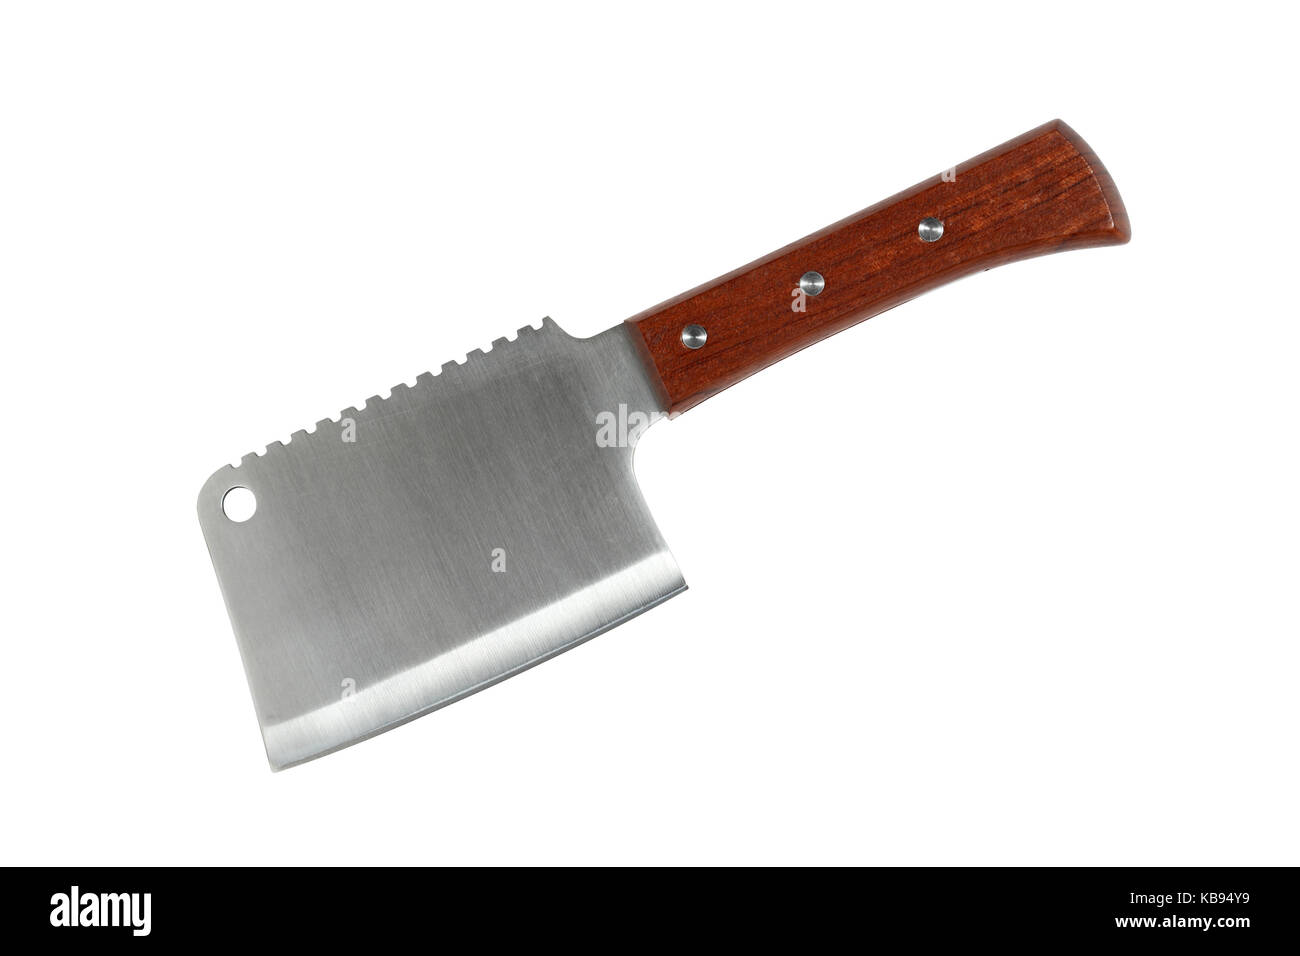 New meat cleaver isolated on white background with clipping path Stock Photo